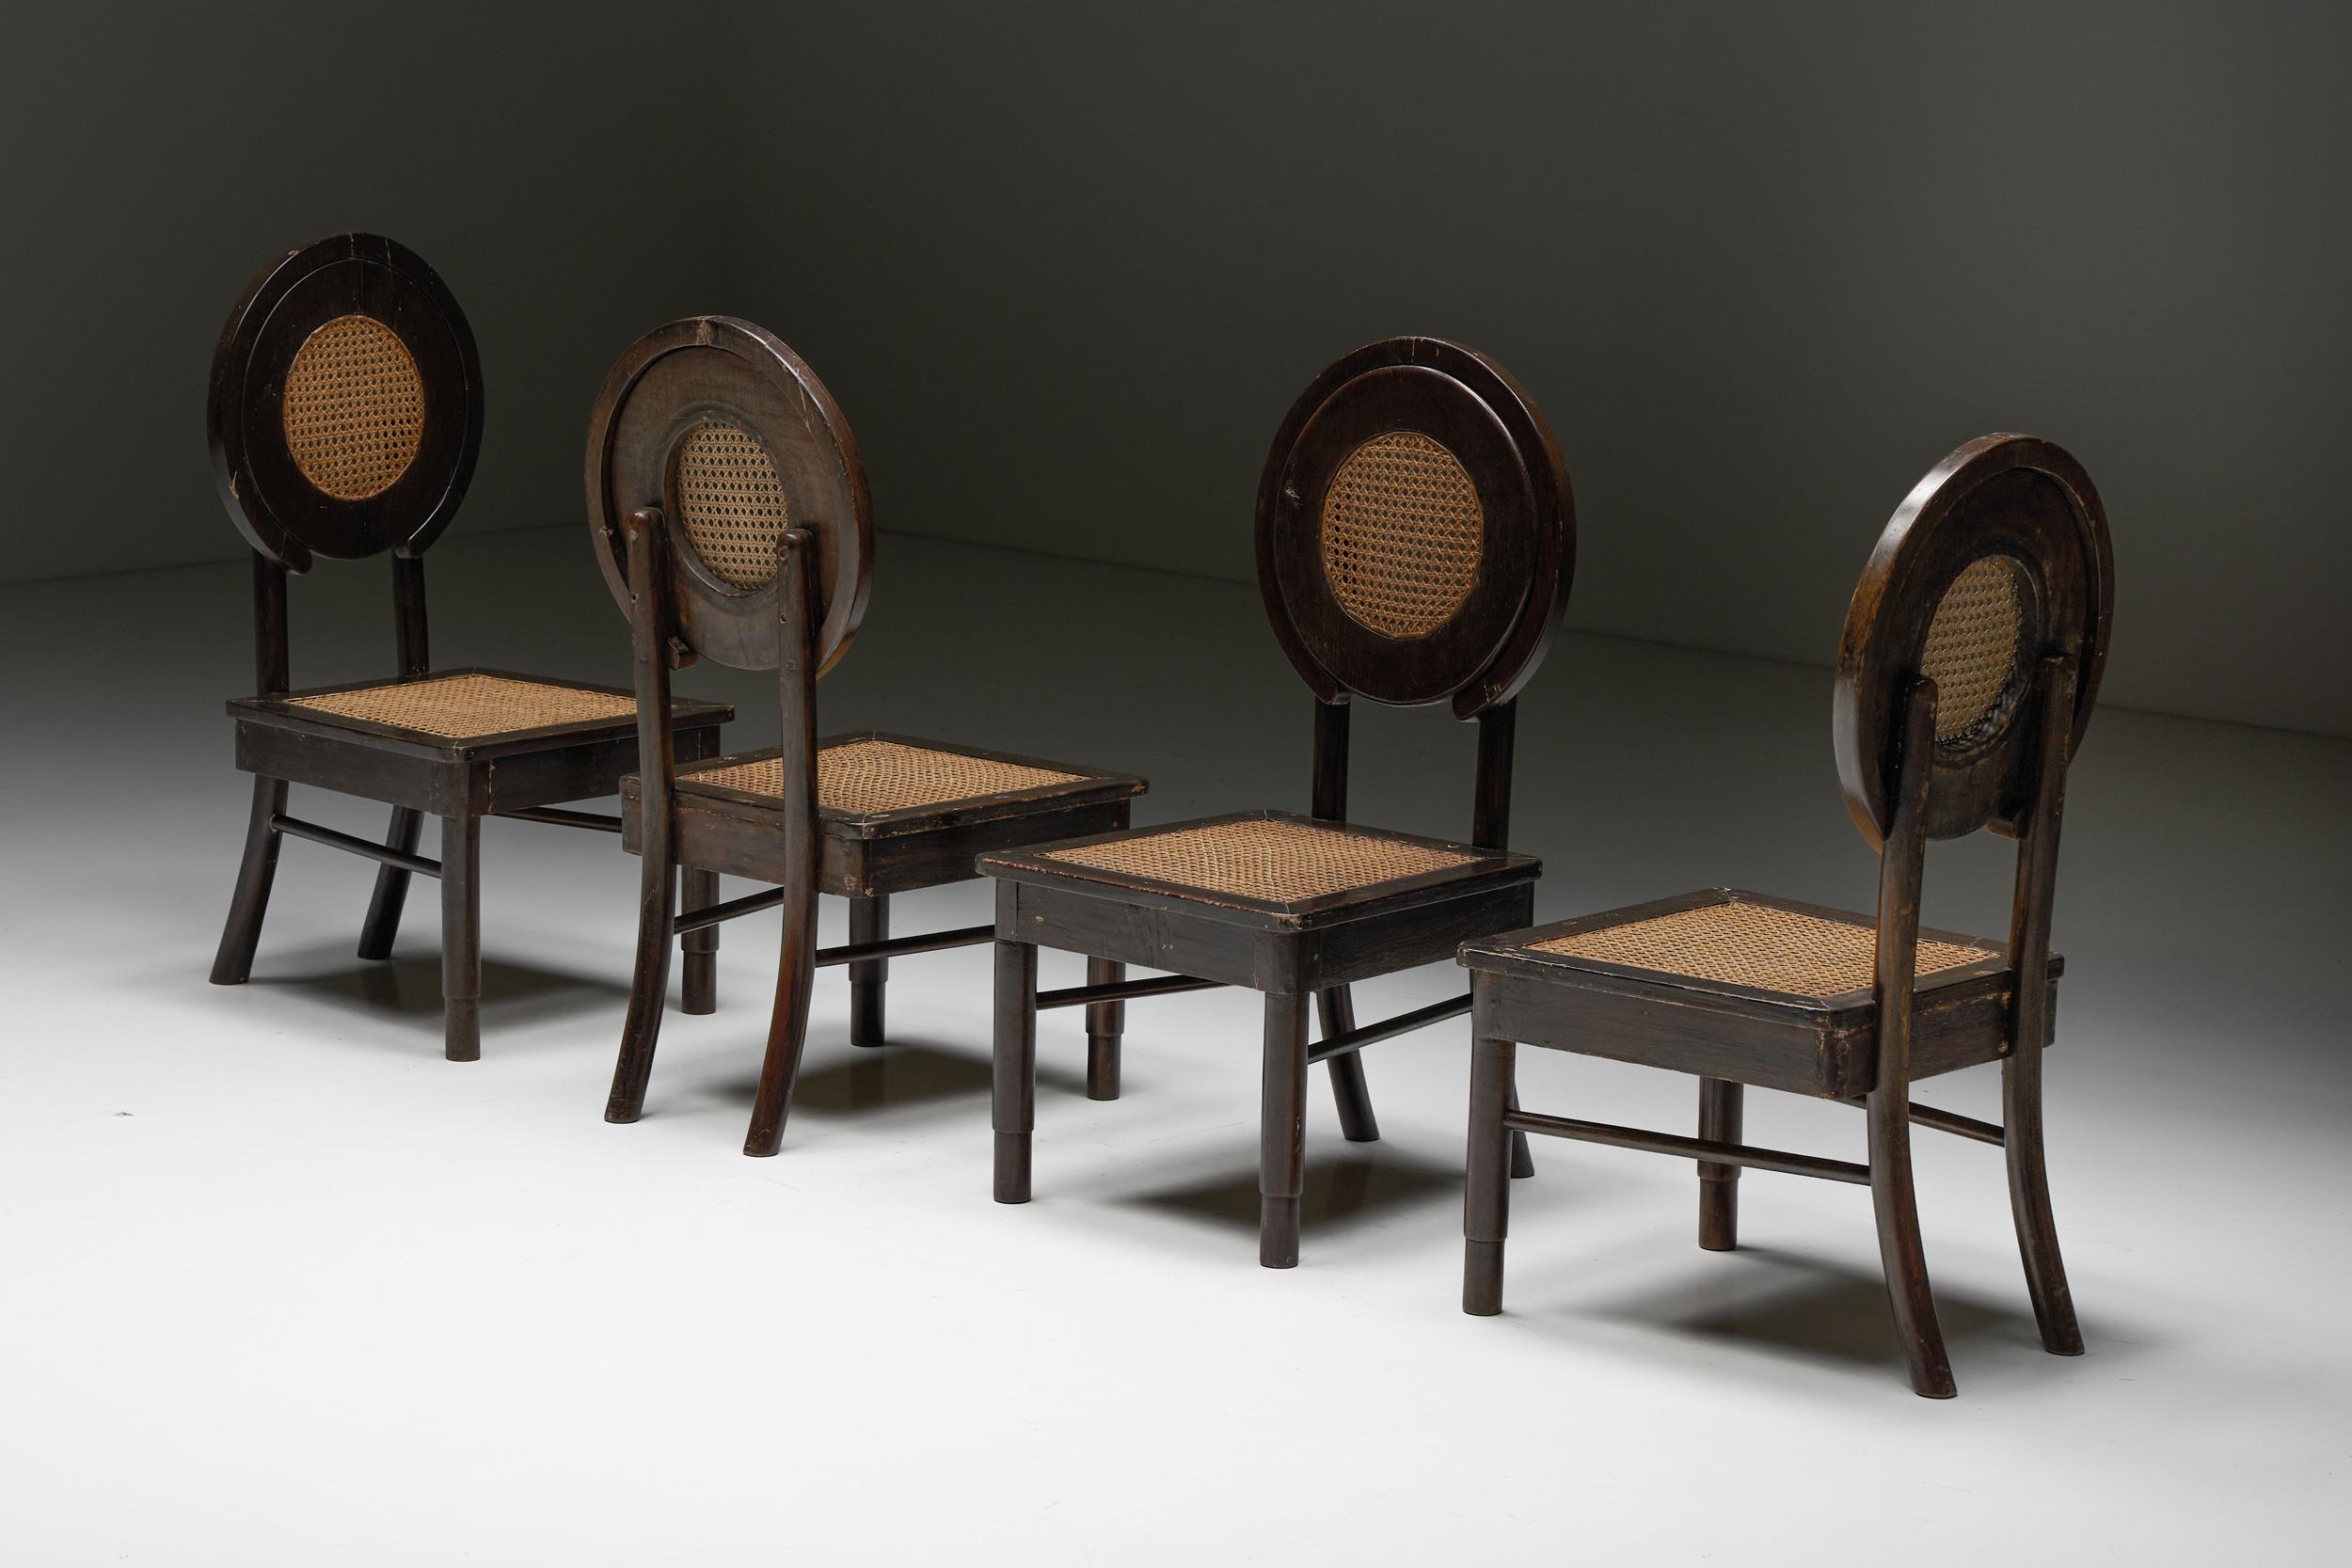 European Dining Chairs with Cane Circle Backs, Early 20th Century For Sale